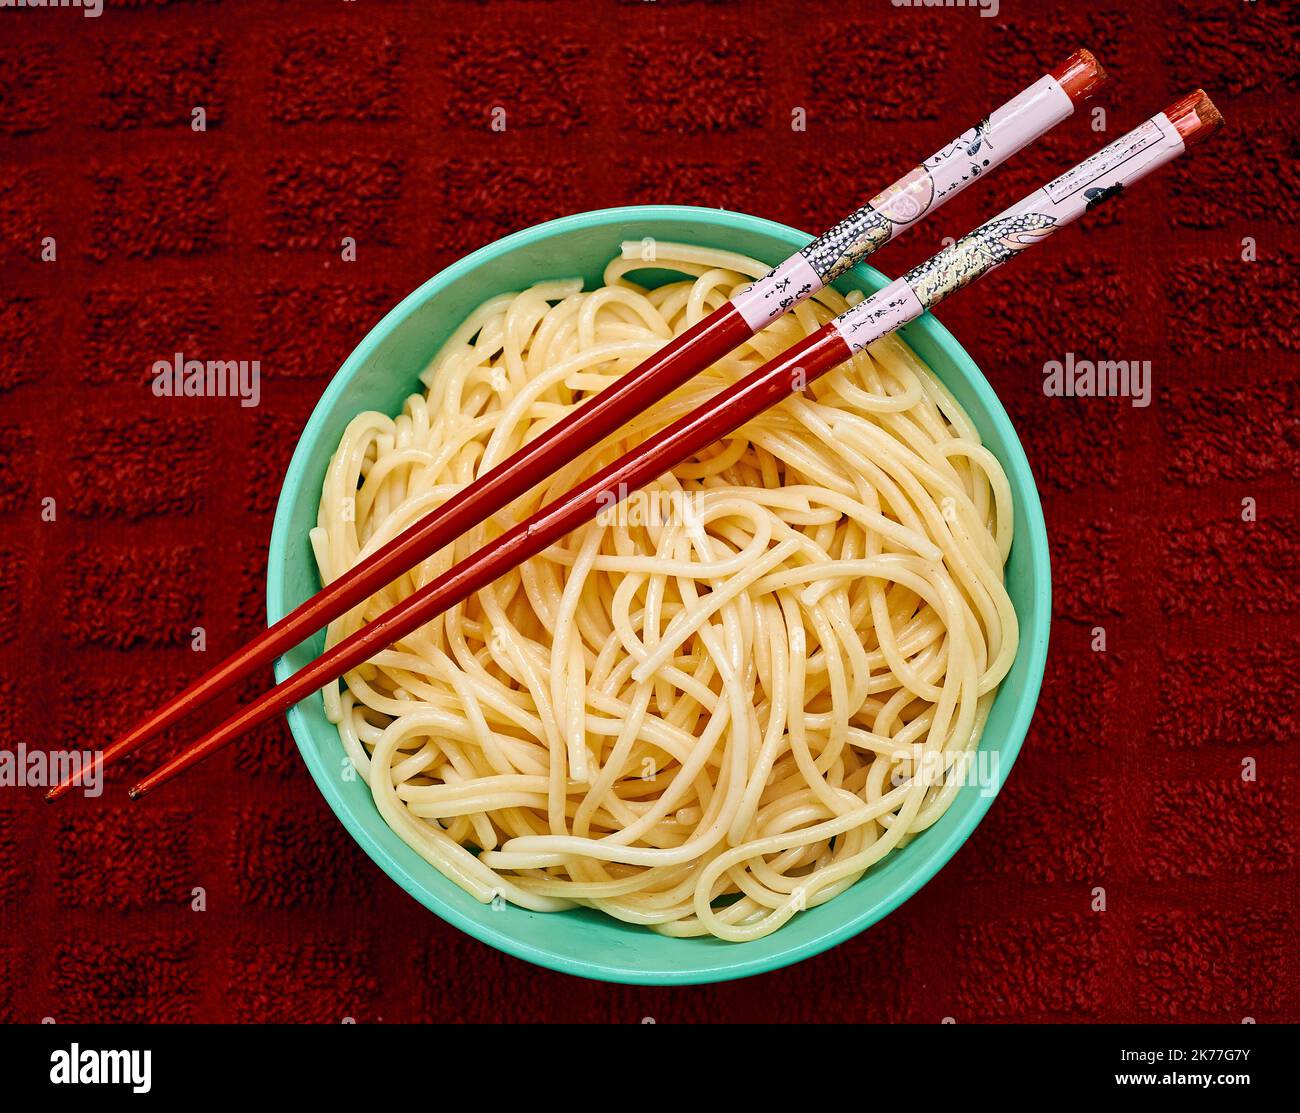 Organic semolina pasta is served in a small teal bowl with red chapstick over a red kitchen towl Stock Photo